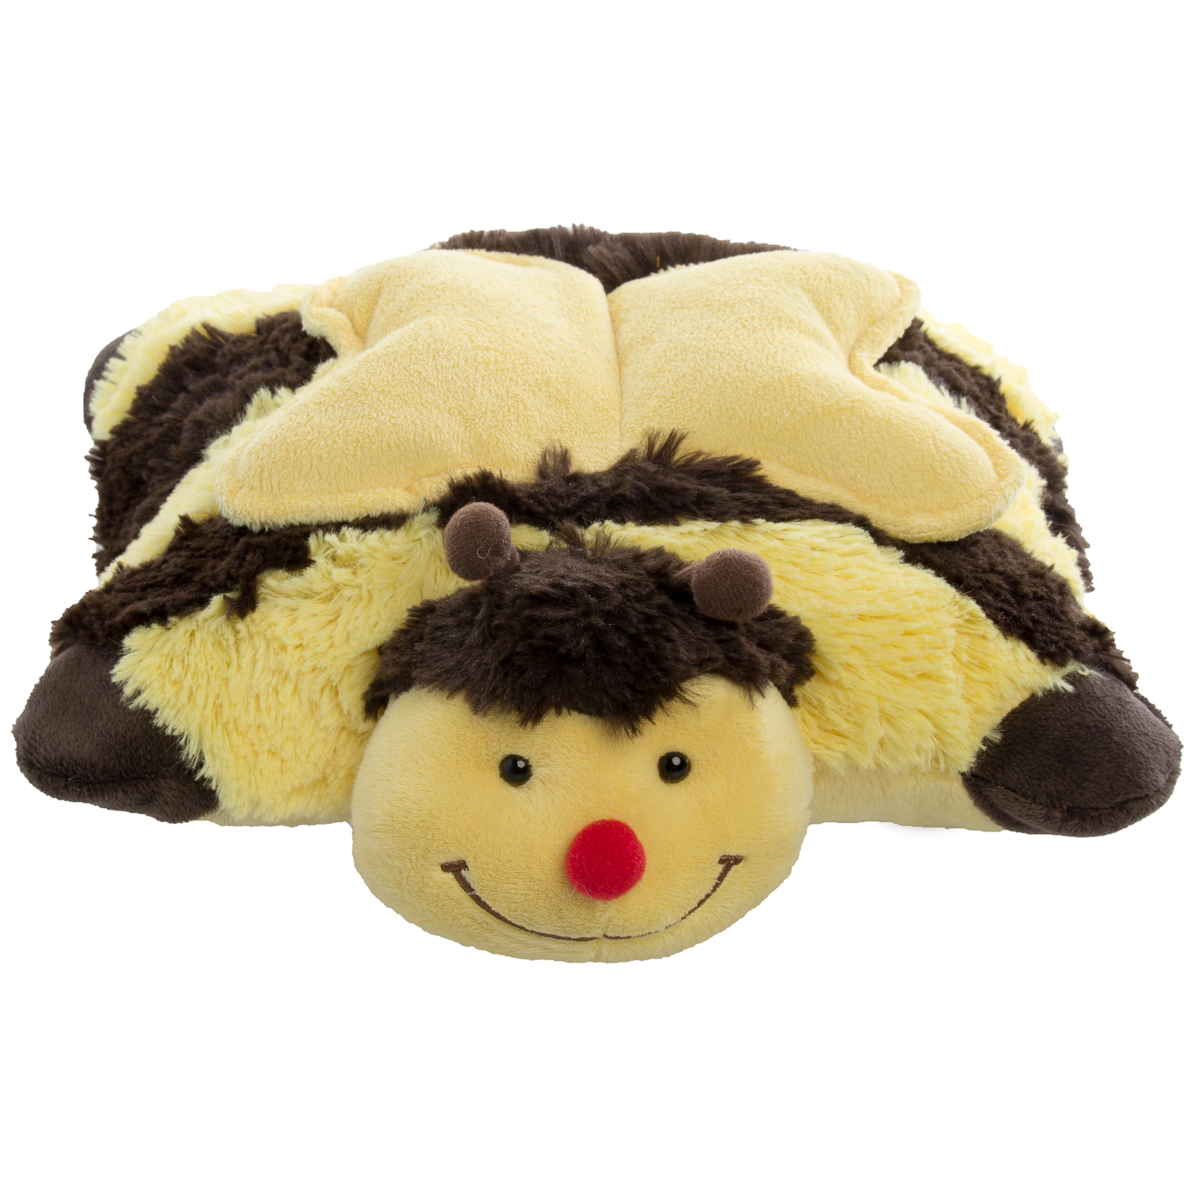 Pillow Pets Pee Wee 11 Inch Super Soft Stuffed Animal Pillow For Kids Toddlers Babies Cute Plush Toys - image 2 of 3